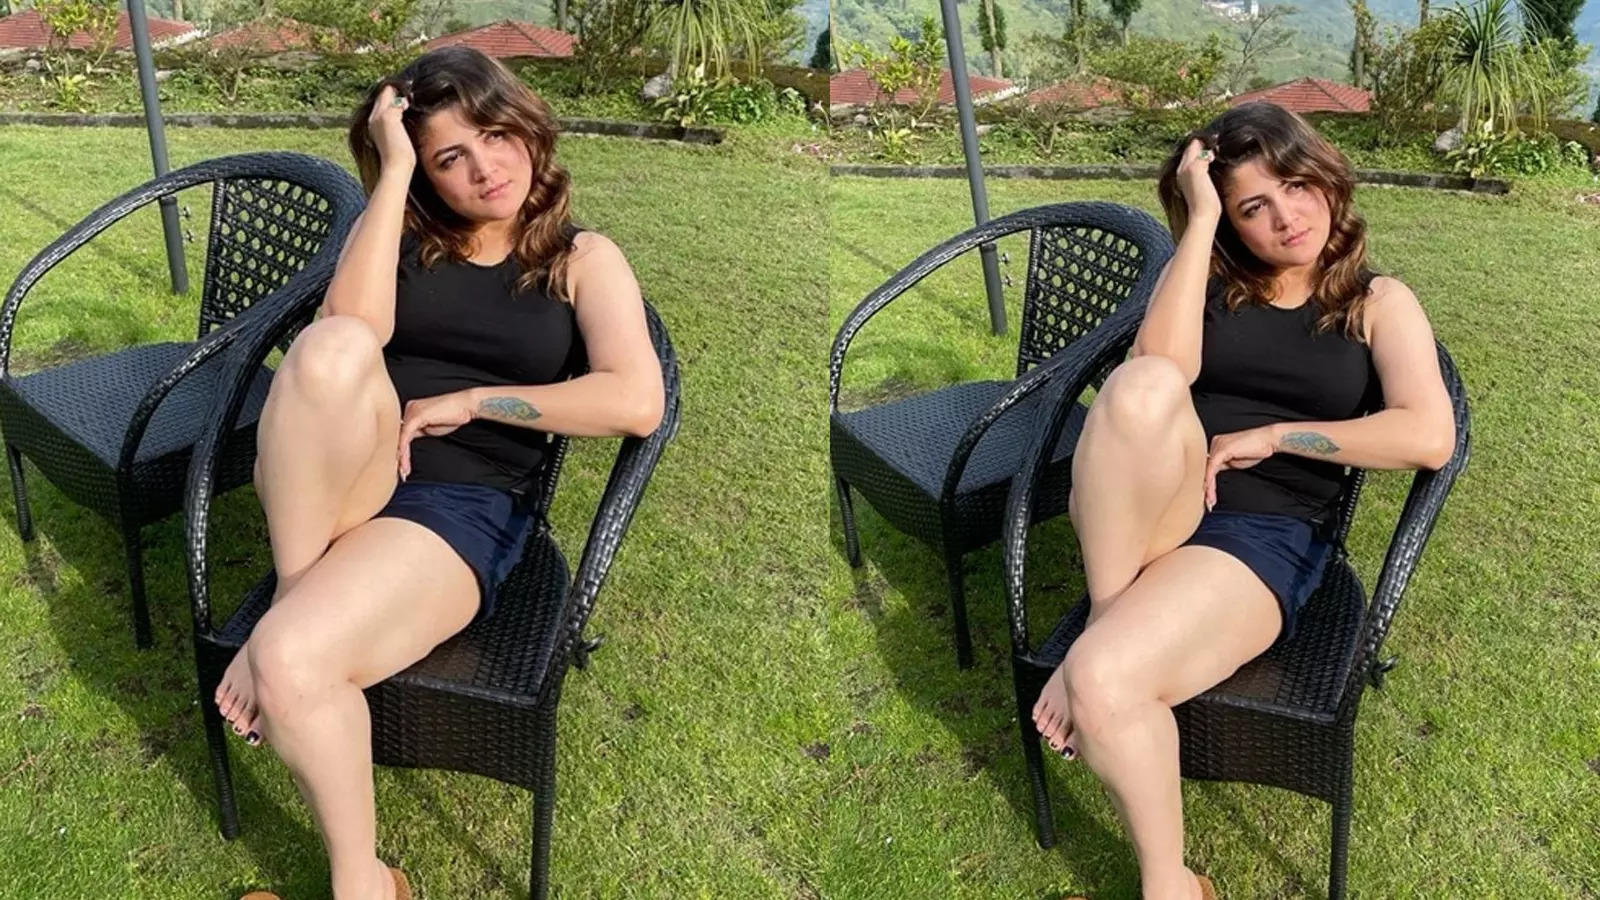 Is Bengali actress Srabanti Chatterjee getting divorced for third time? Estranged husband makes shocking claims, says the actress calls him fat, incapable of